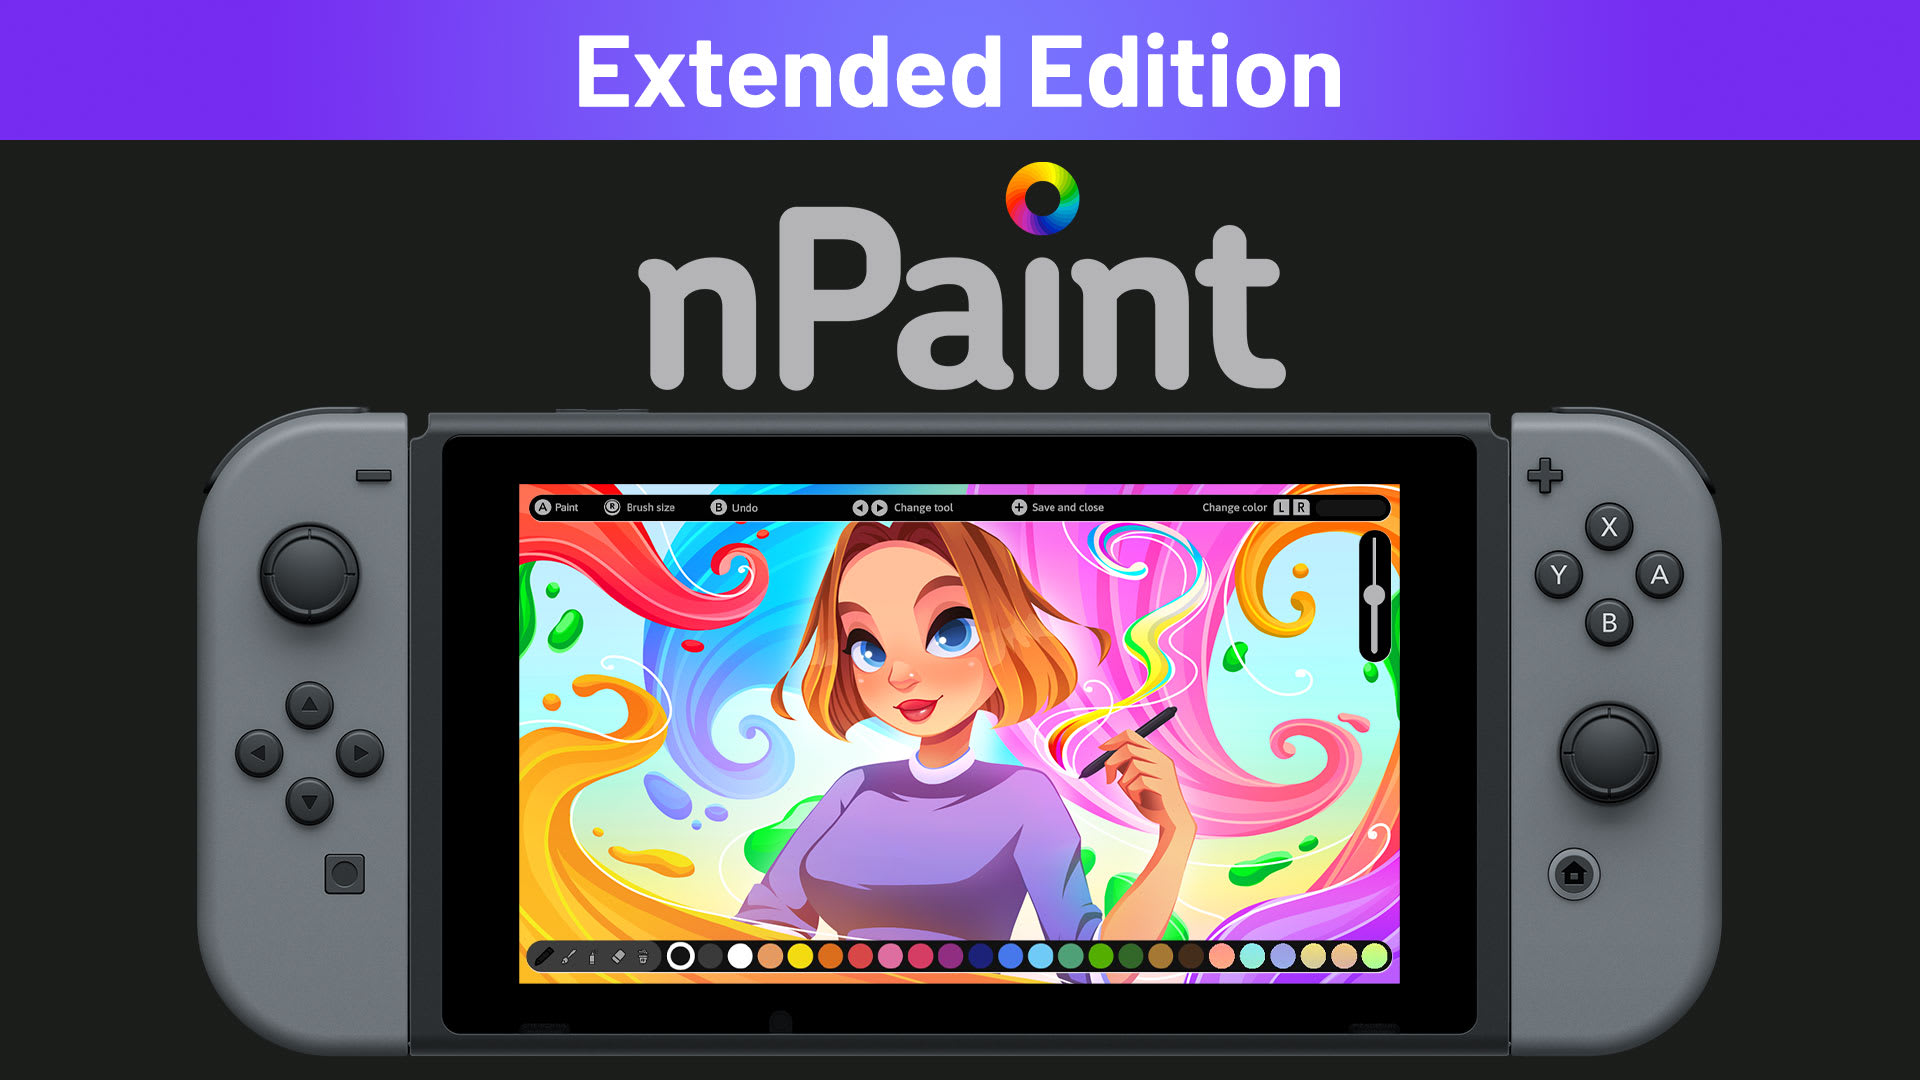 nPaint Extended Edition